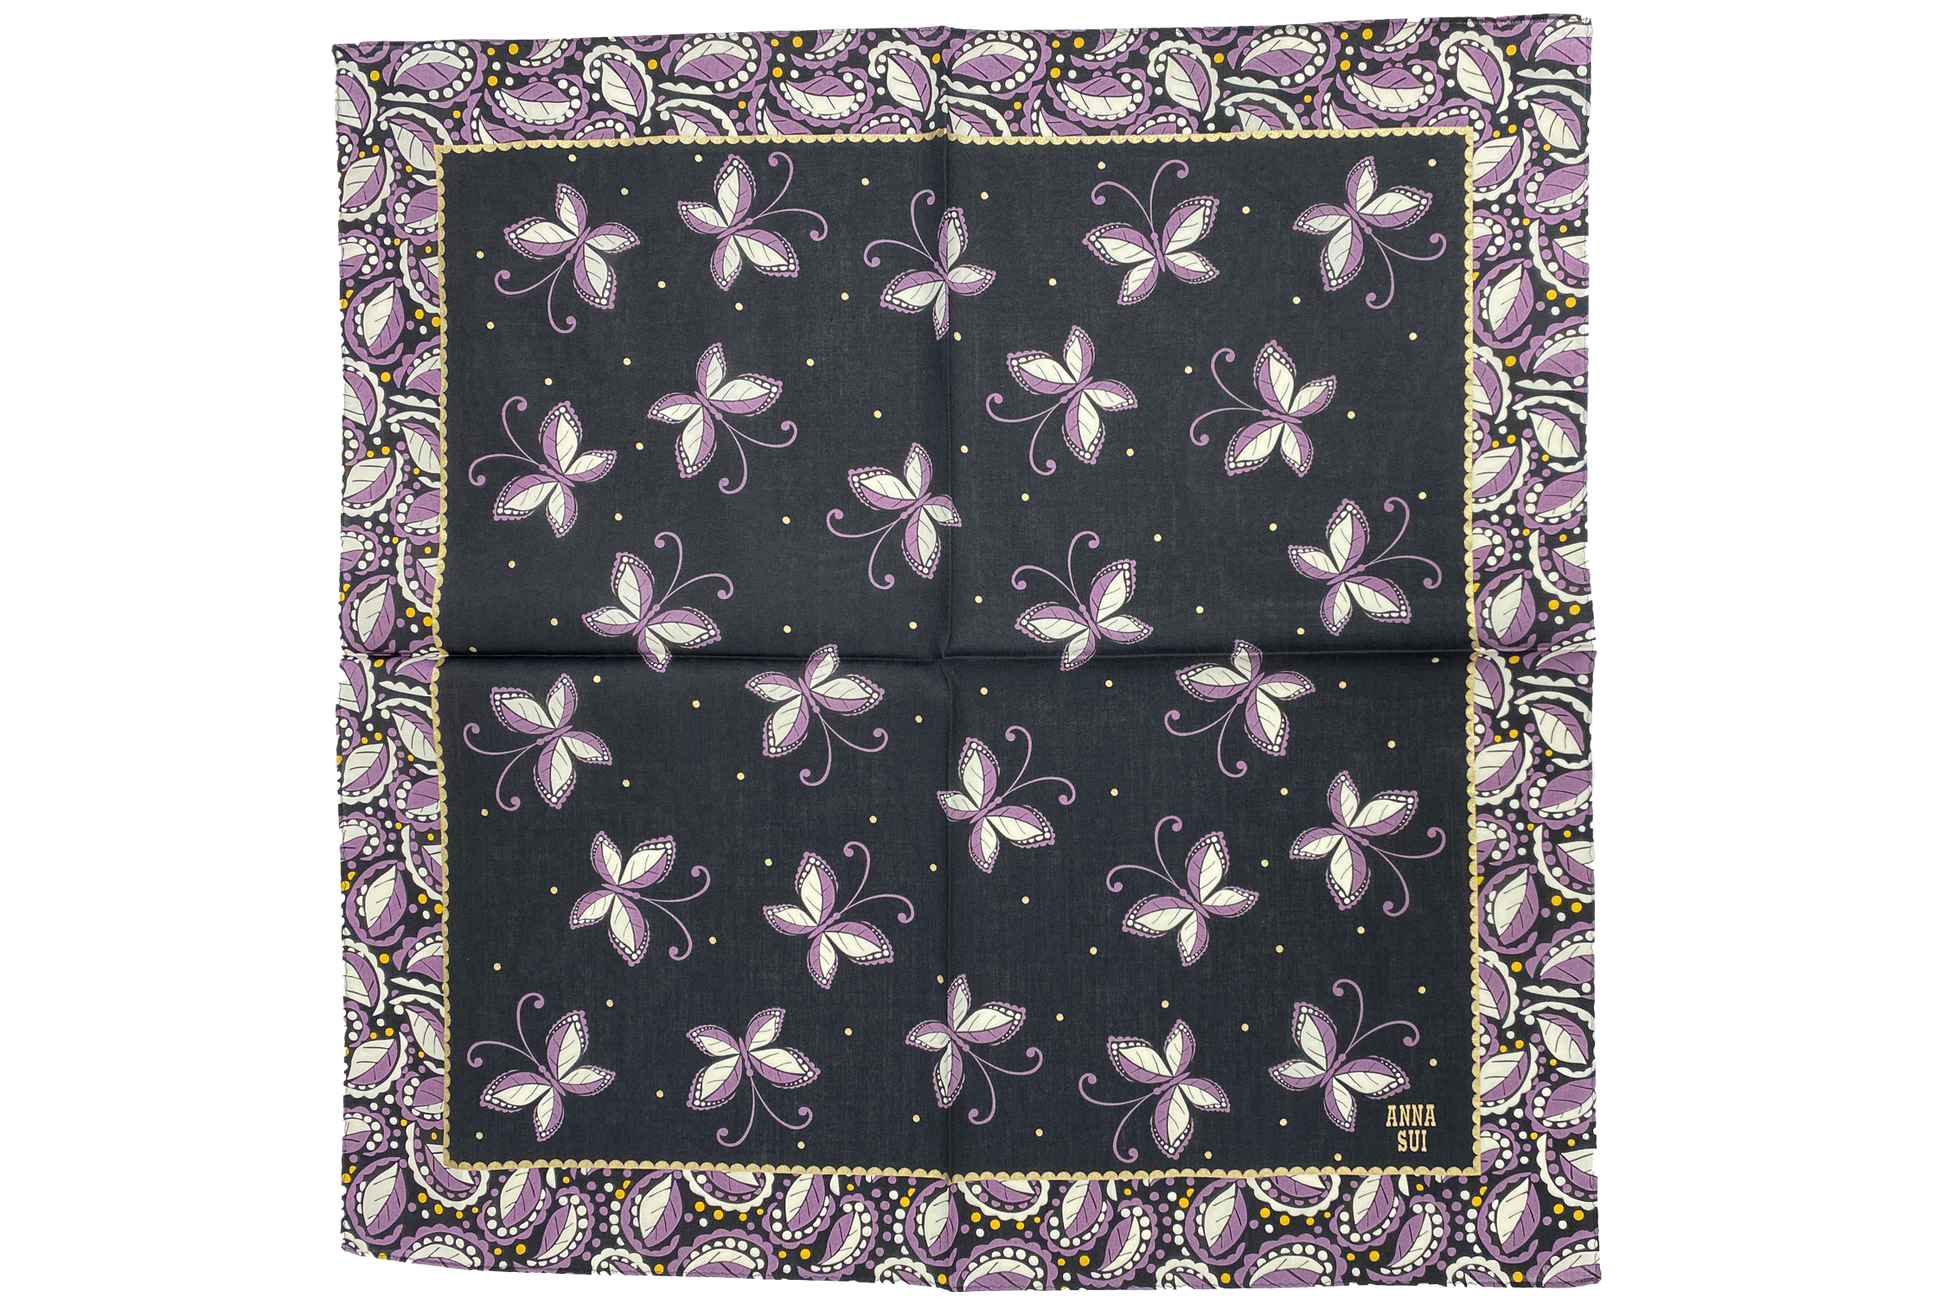 Handkerchief, squared black with pattern of purple/white butterfly, floral hue of purple border